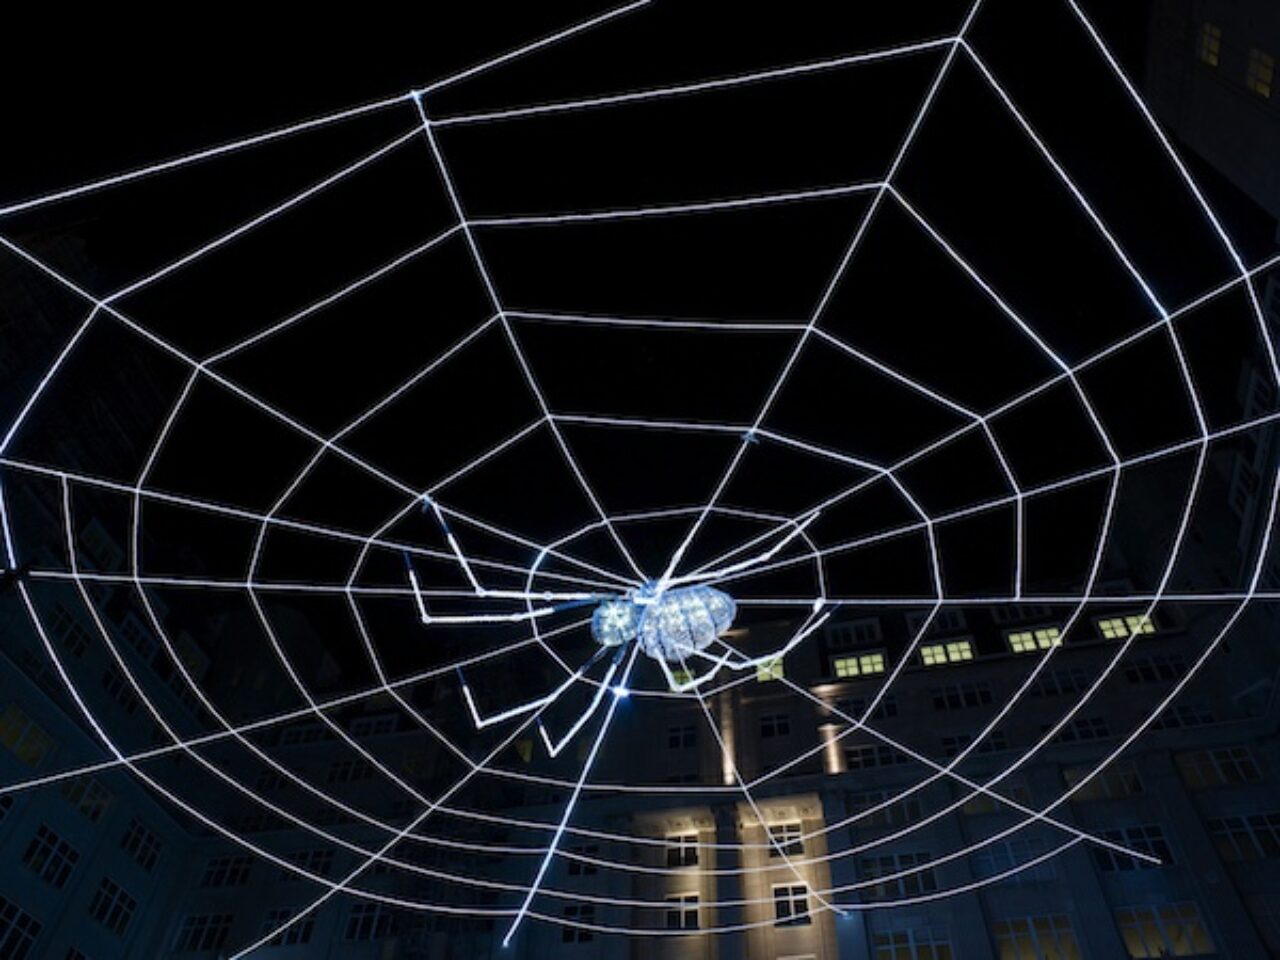 A giant LED lit web hanging above Liverpool's Exchange Flags, with a crystal-studded spider in the center.